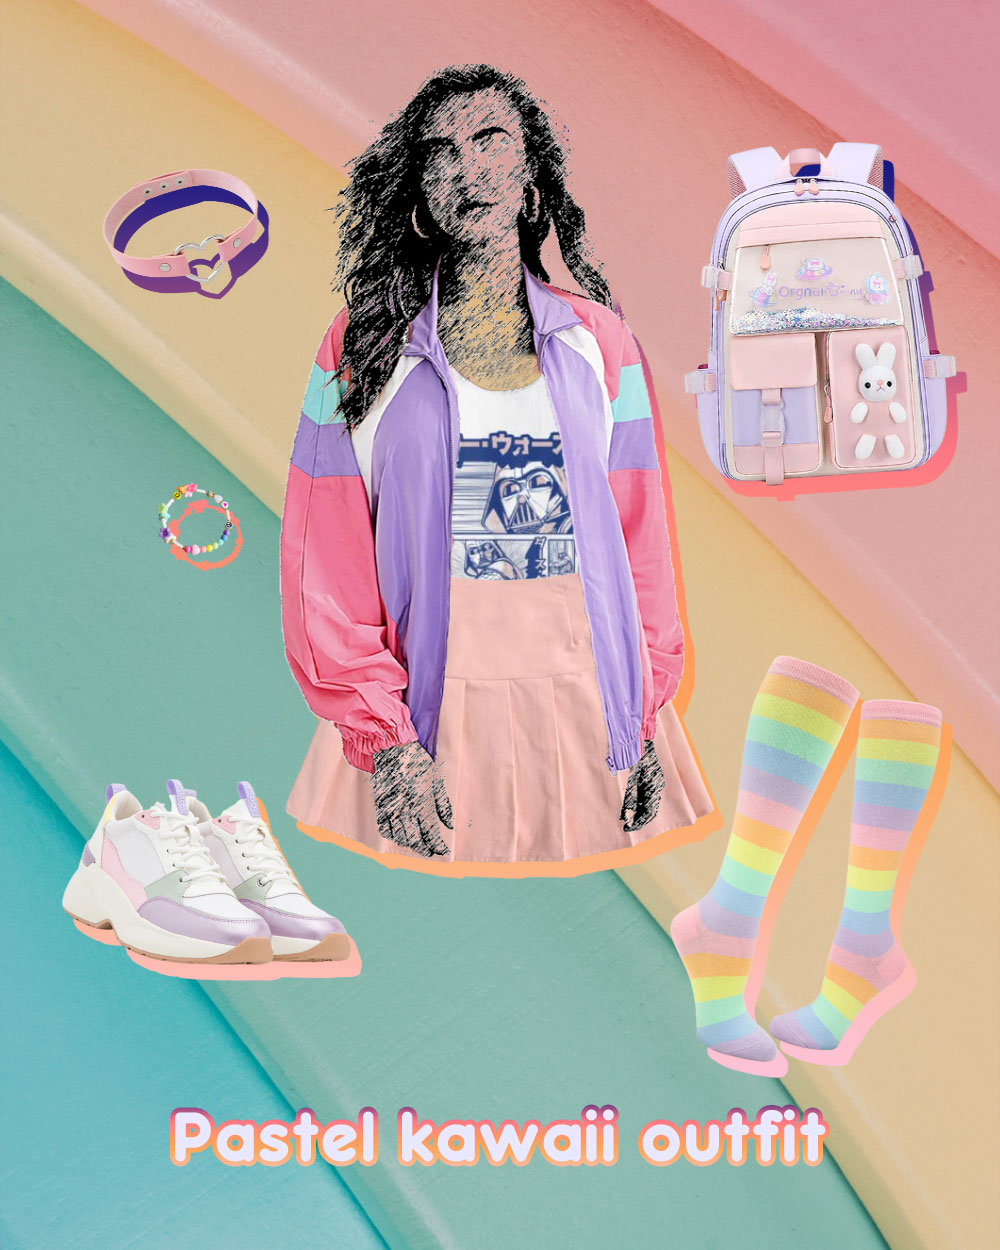 pastel kawaii outfit inspiration - bomber jacket, anime t-shirt, chocker, backpack, rainbow stockings, sneakers